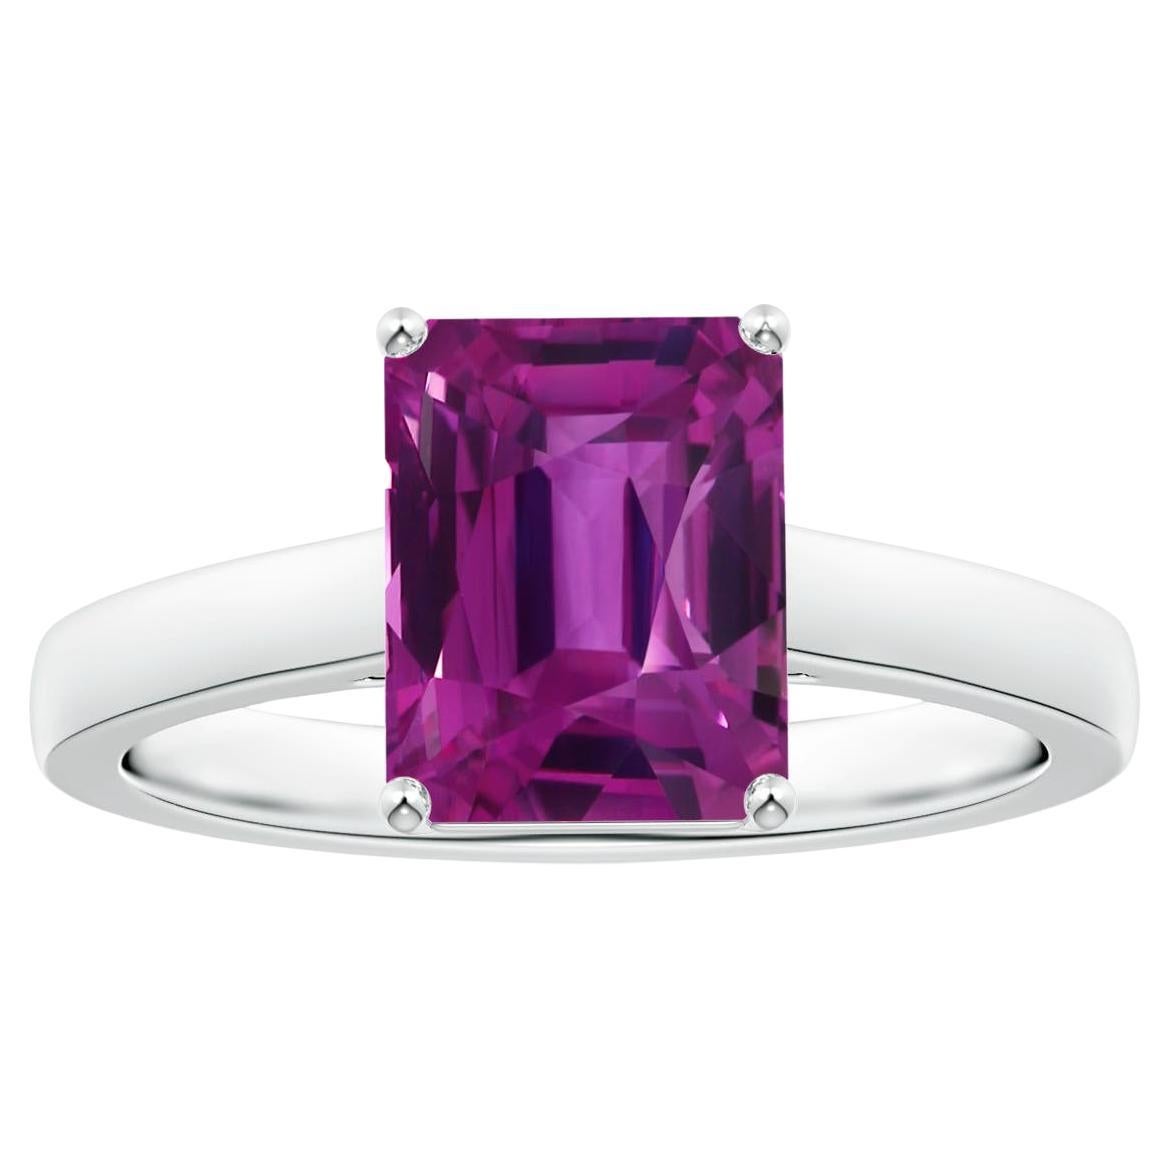 ANGARA GIA Certified Emerald-Cut Pink Sapphire Solitaire Ring in Platinum